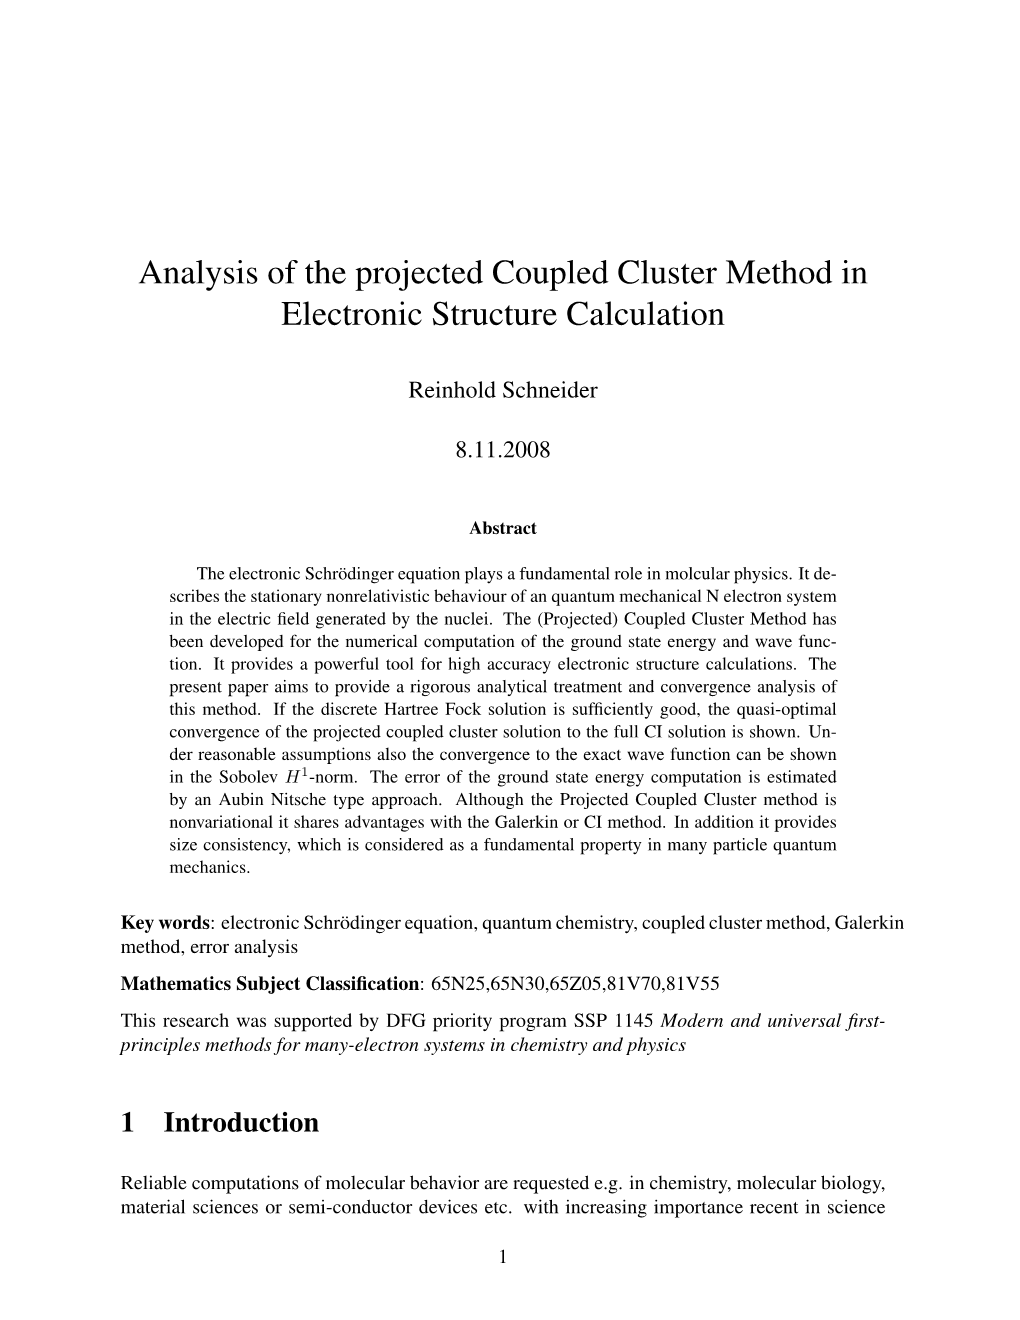 Analysis of the Projected Coupled Cluster Method in Electronic Structure Calculation